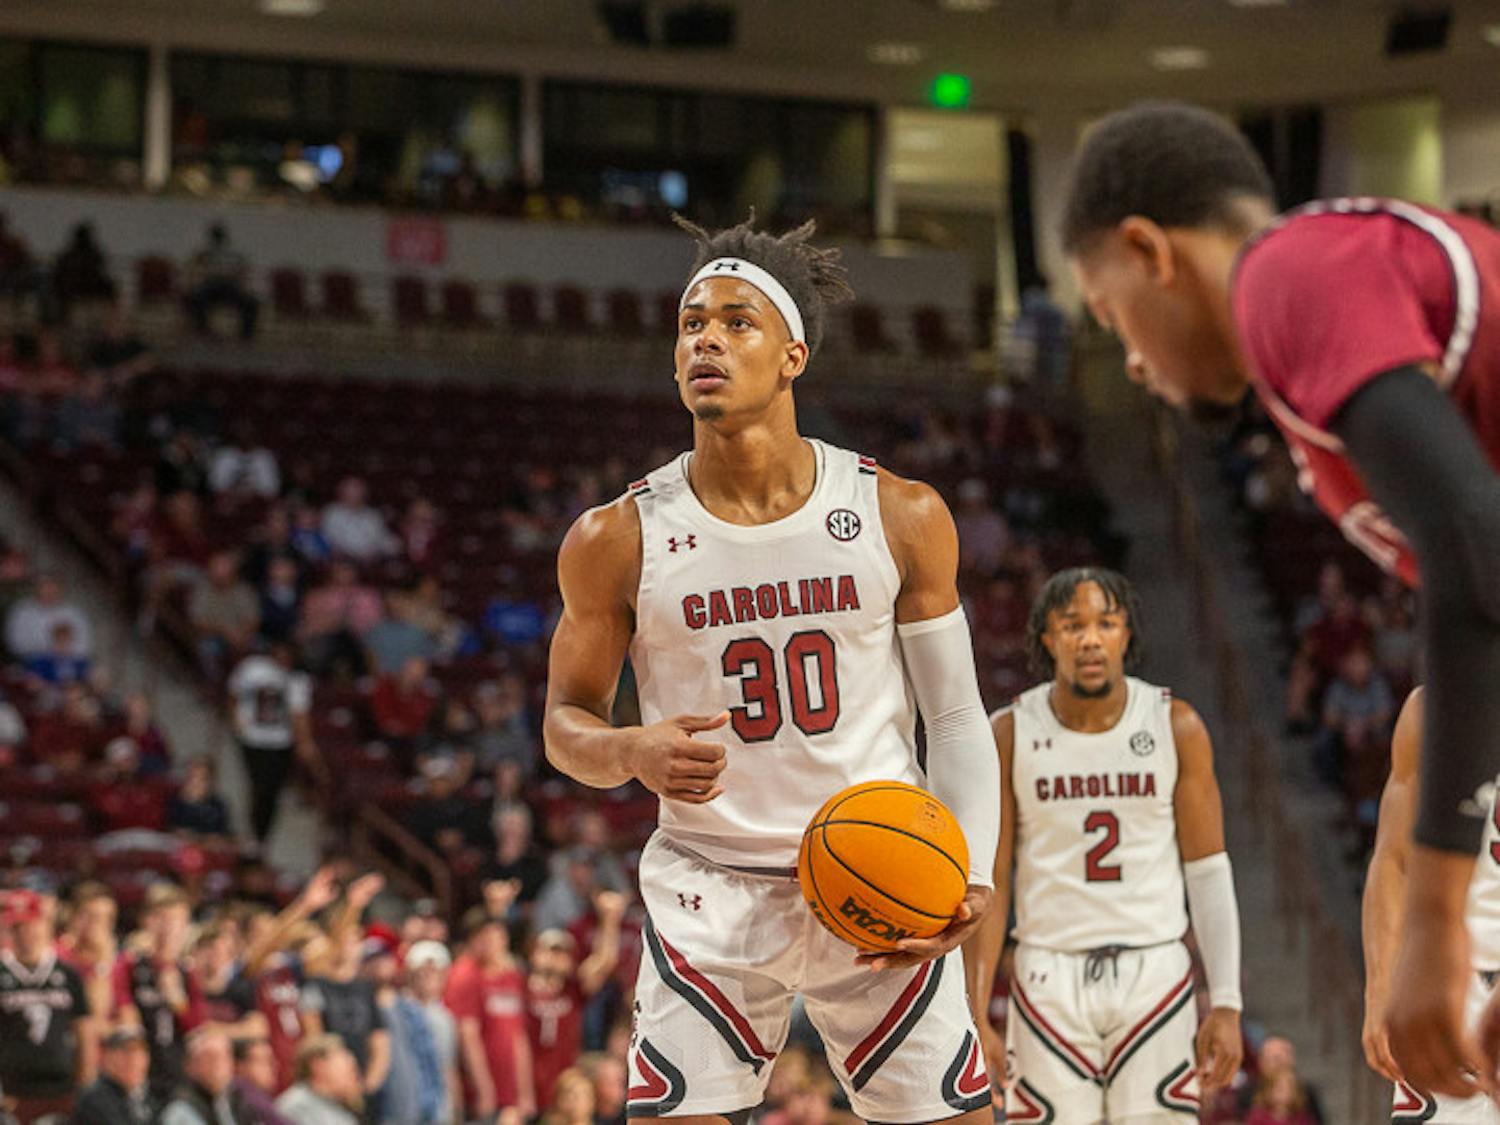 Freshman forward Daniel Hankins-Sanford calibrates his shot at the free-point line. Hankins-Sanford made both shots to get the Gamecocks two points against the S.C. State Bulldogs on Nov. 8, 2022.